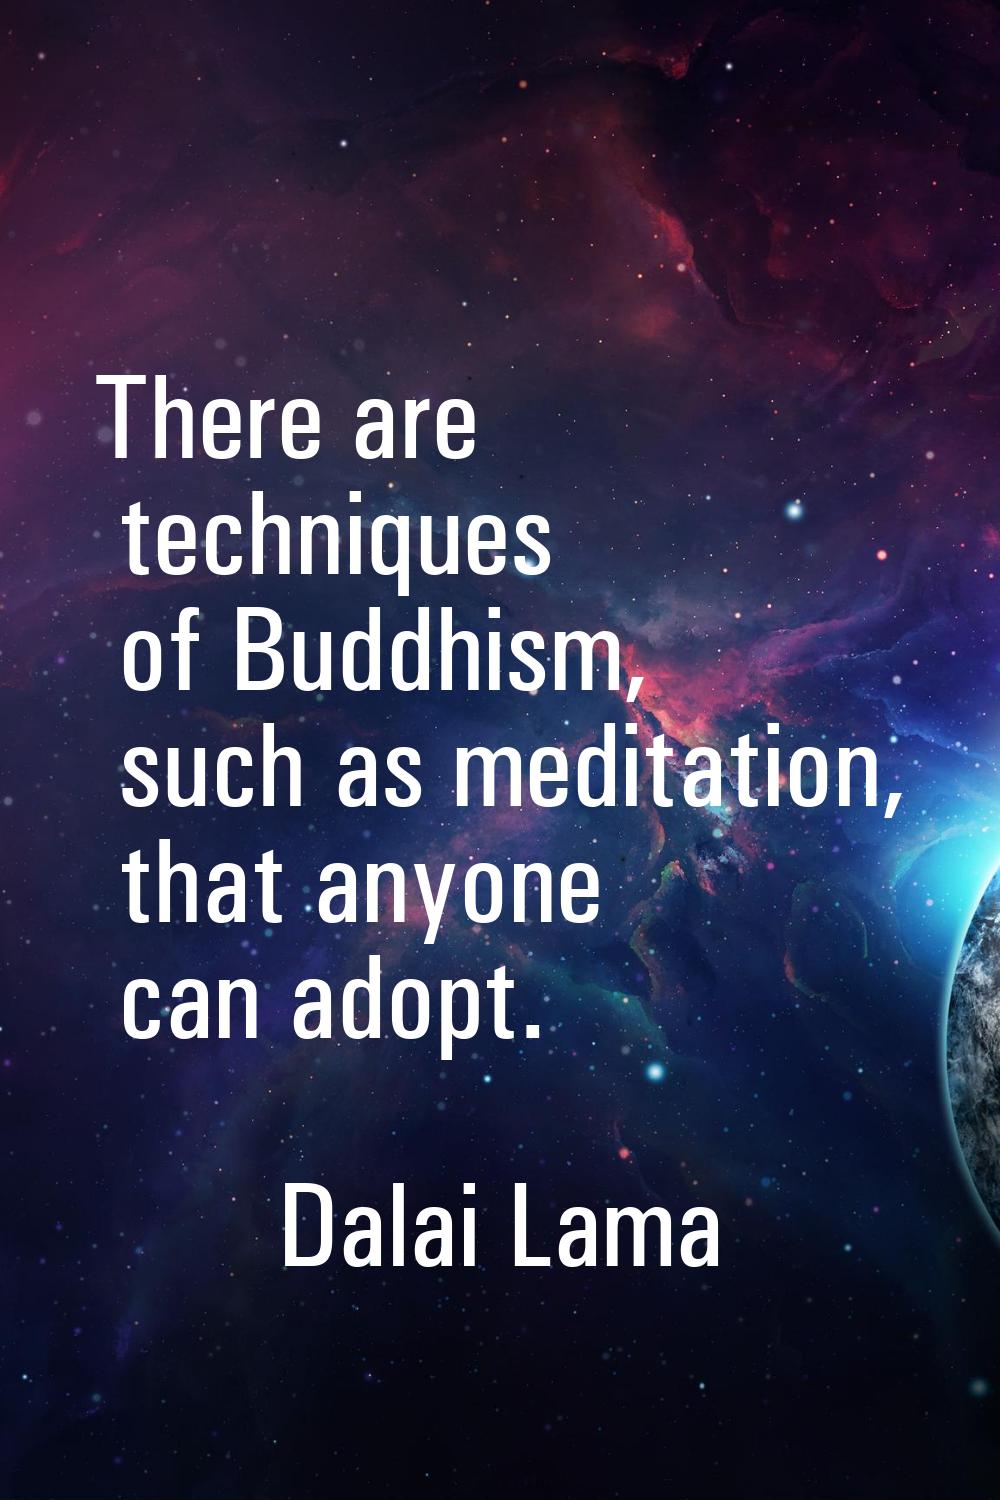 There are techniques of Buddhism, such as meditation, that anyone can adopt.